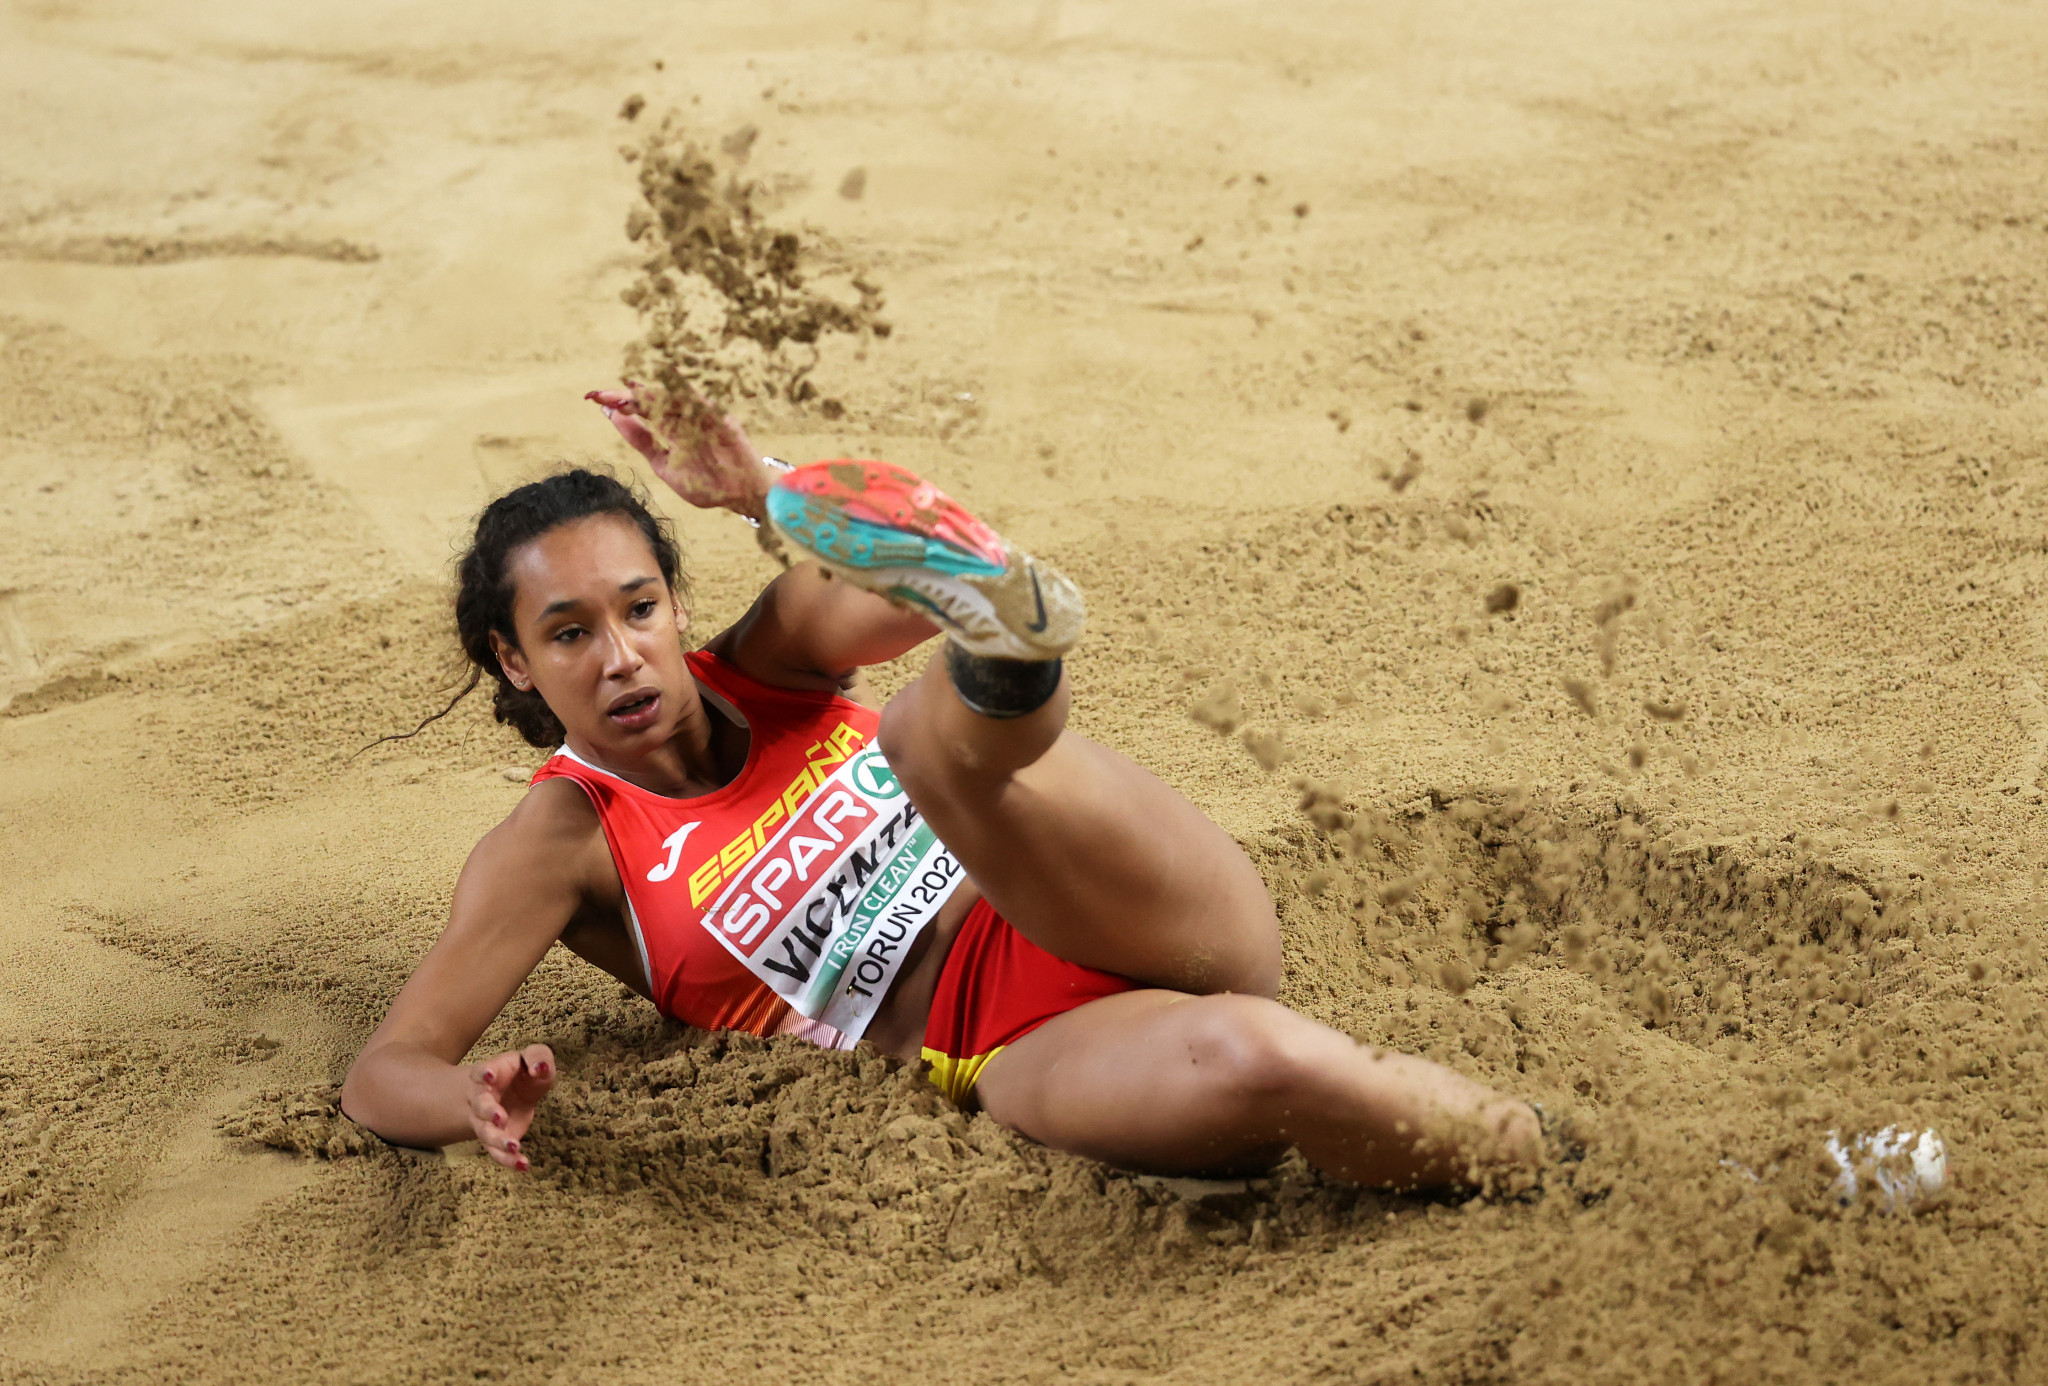 Maria Vicente rose from seventh to clinch the heptathlon title in Lana ©Getty Images